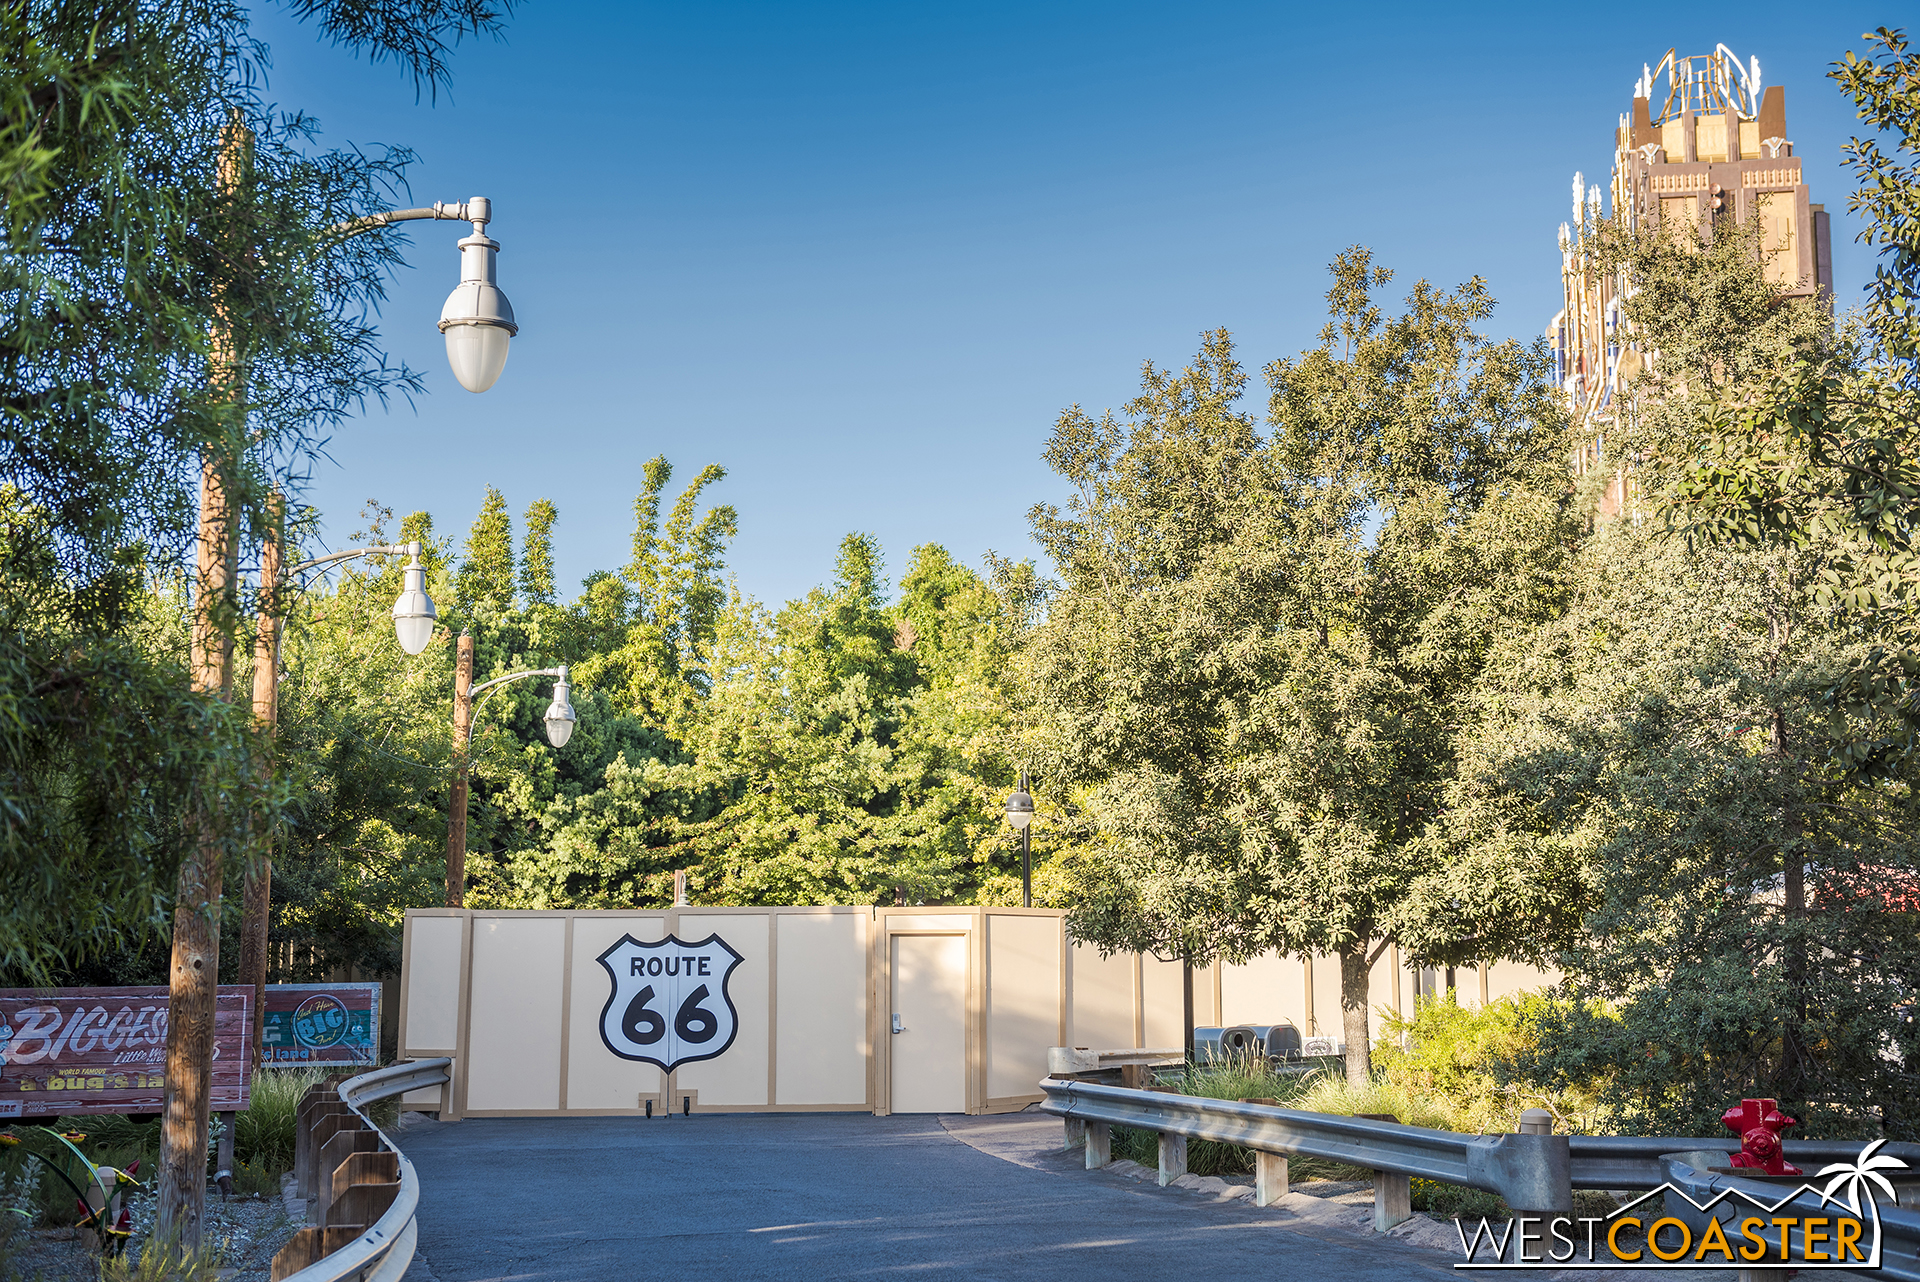  Guess that means Route 66 ends here (and similarly on the other side with Hollywood Land’s terminus by Guardians of the Galaxy). 